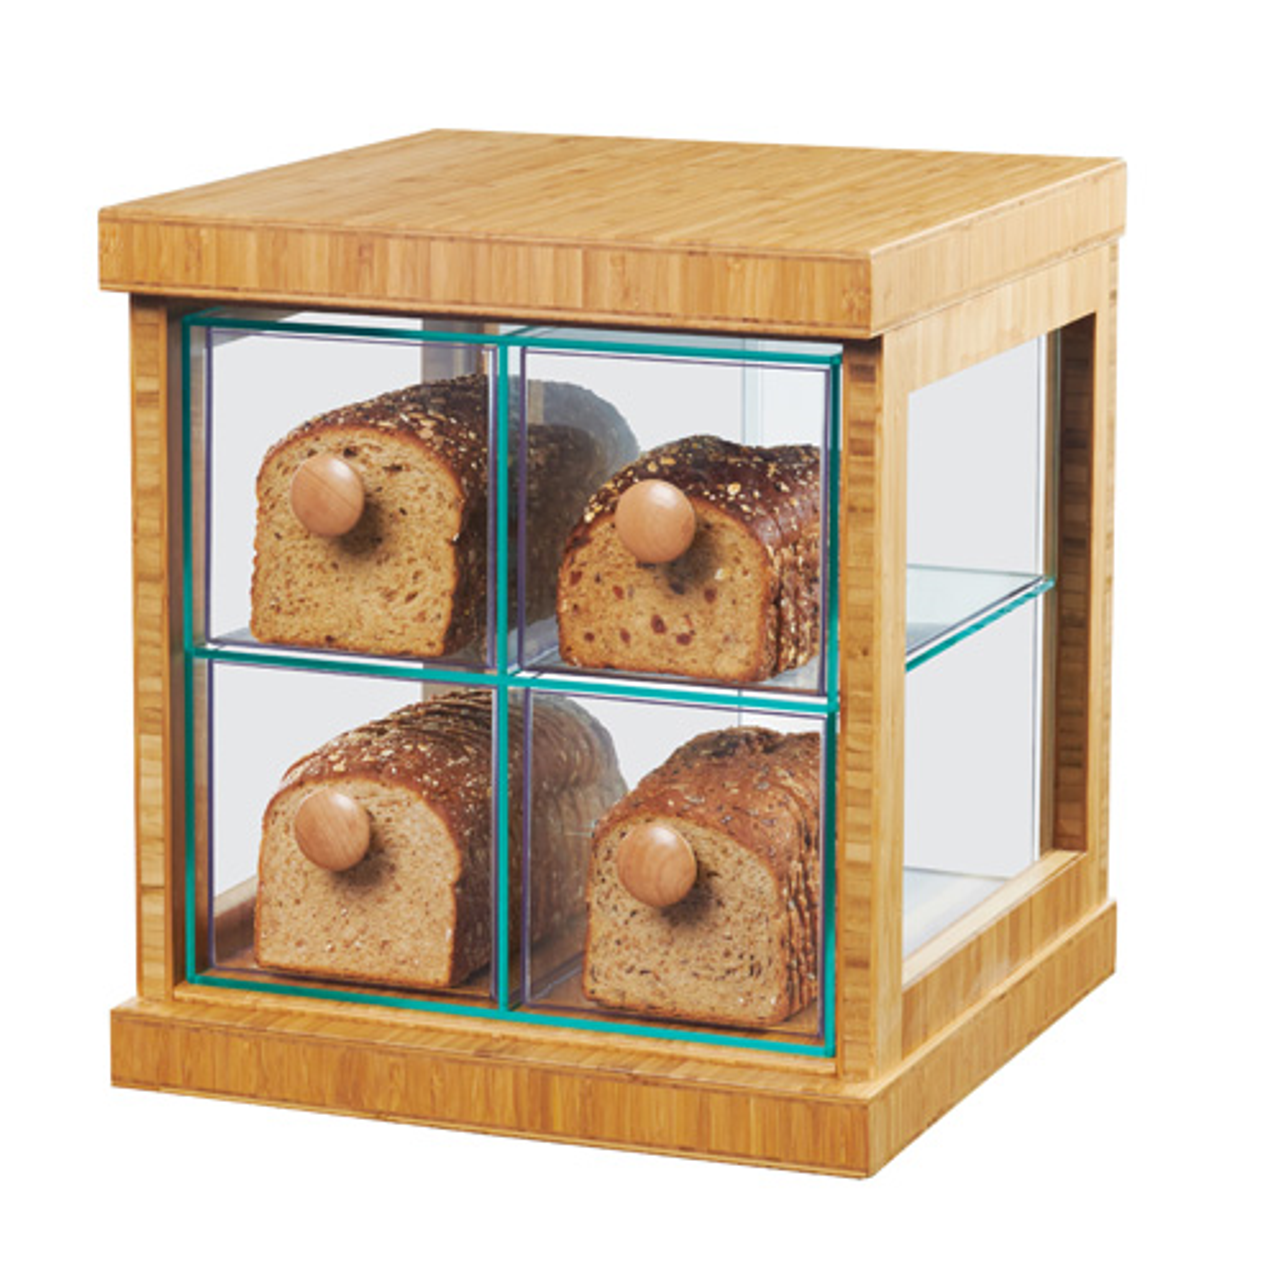 Bread Case, 16-1/2"W x 15"D x 15"H, 2-tier, self serve, (4) drawers with handles, clear acrylic, bamboo frame, BPA Free